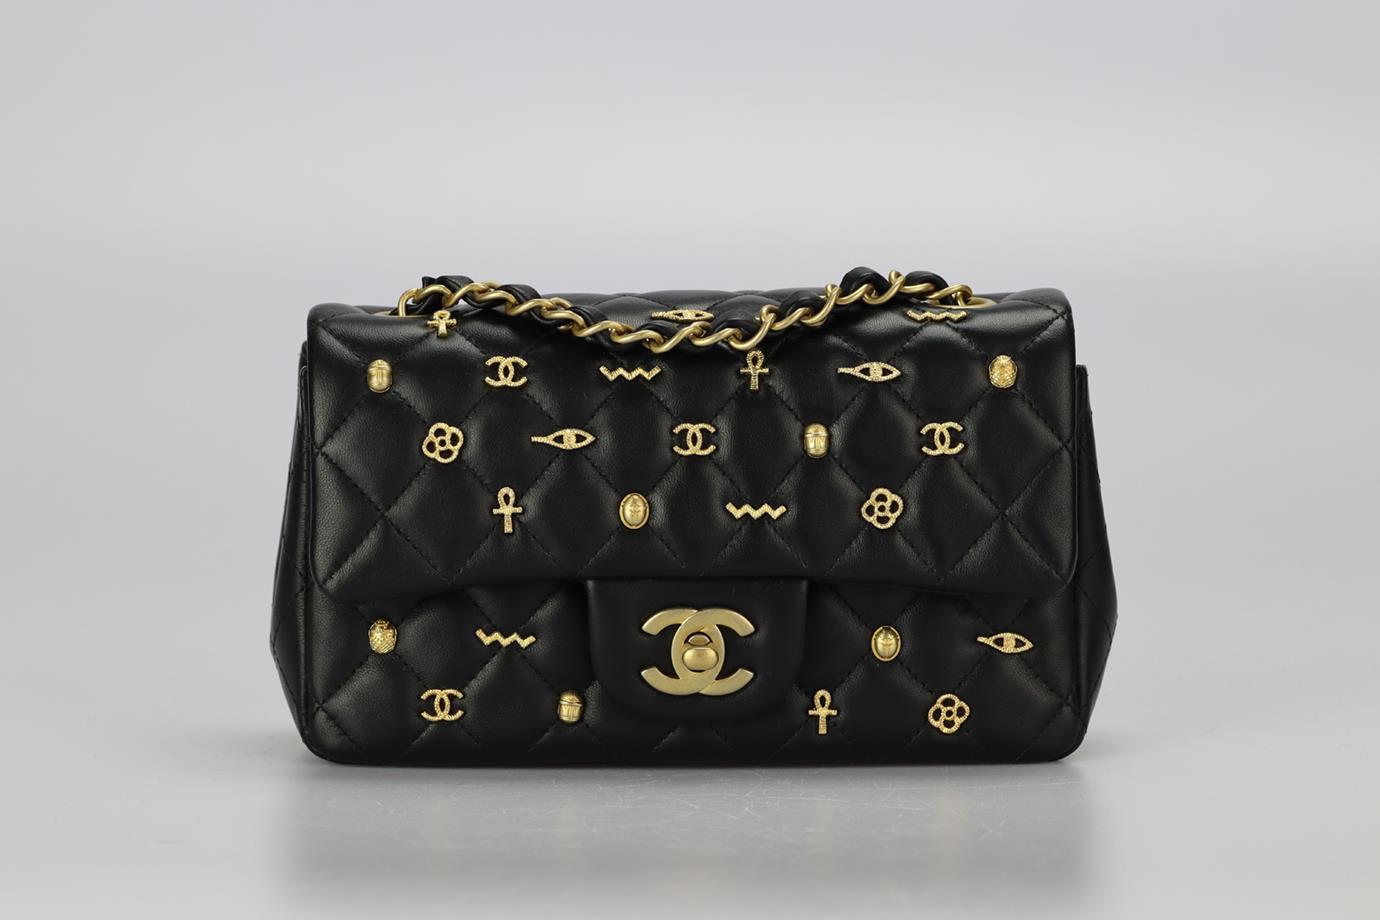 Chanel 2019 Classic Mini Rectangle Flap Egyptian Amulet Quilted Leather Shoulder Bag. Black. Twist lock fastening - Front. Comes with - authenticity card. Does not come with - dustbag or box. Height: 4.5 in. Width: 7.8 in. Depth: 2.4 in. Strap drop: